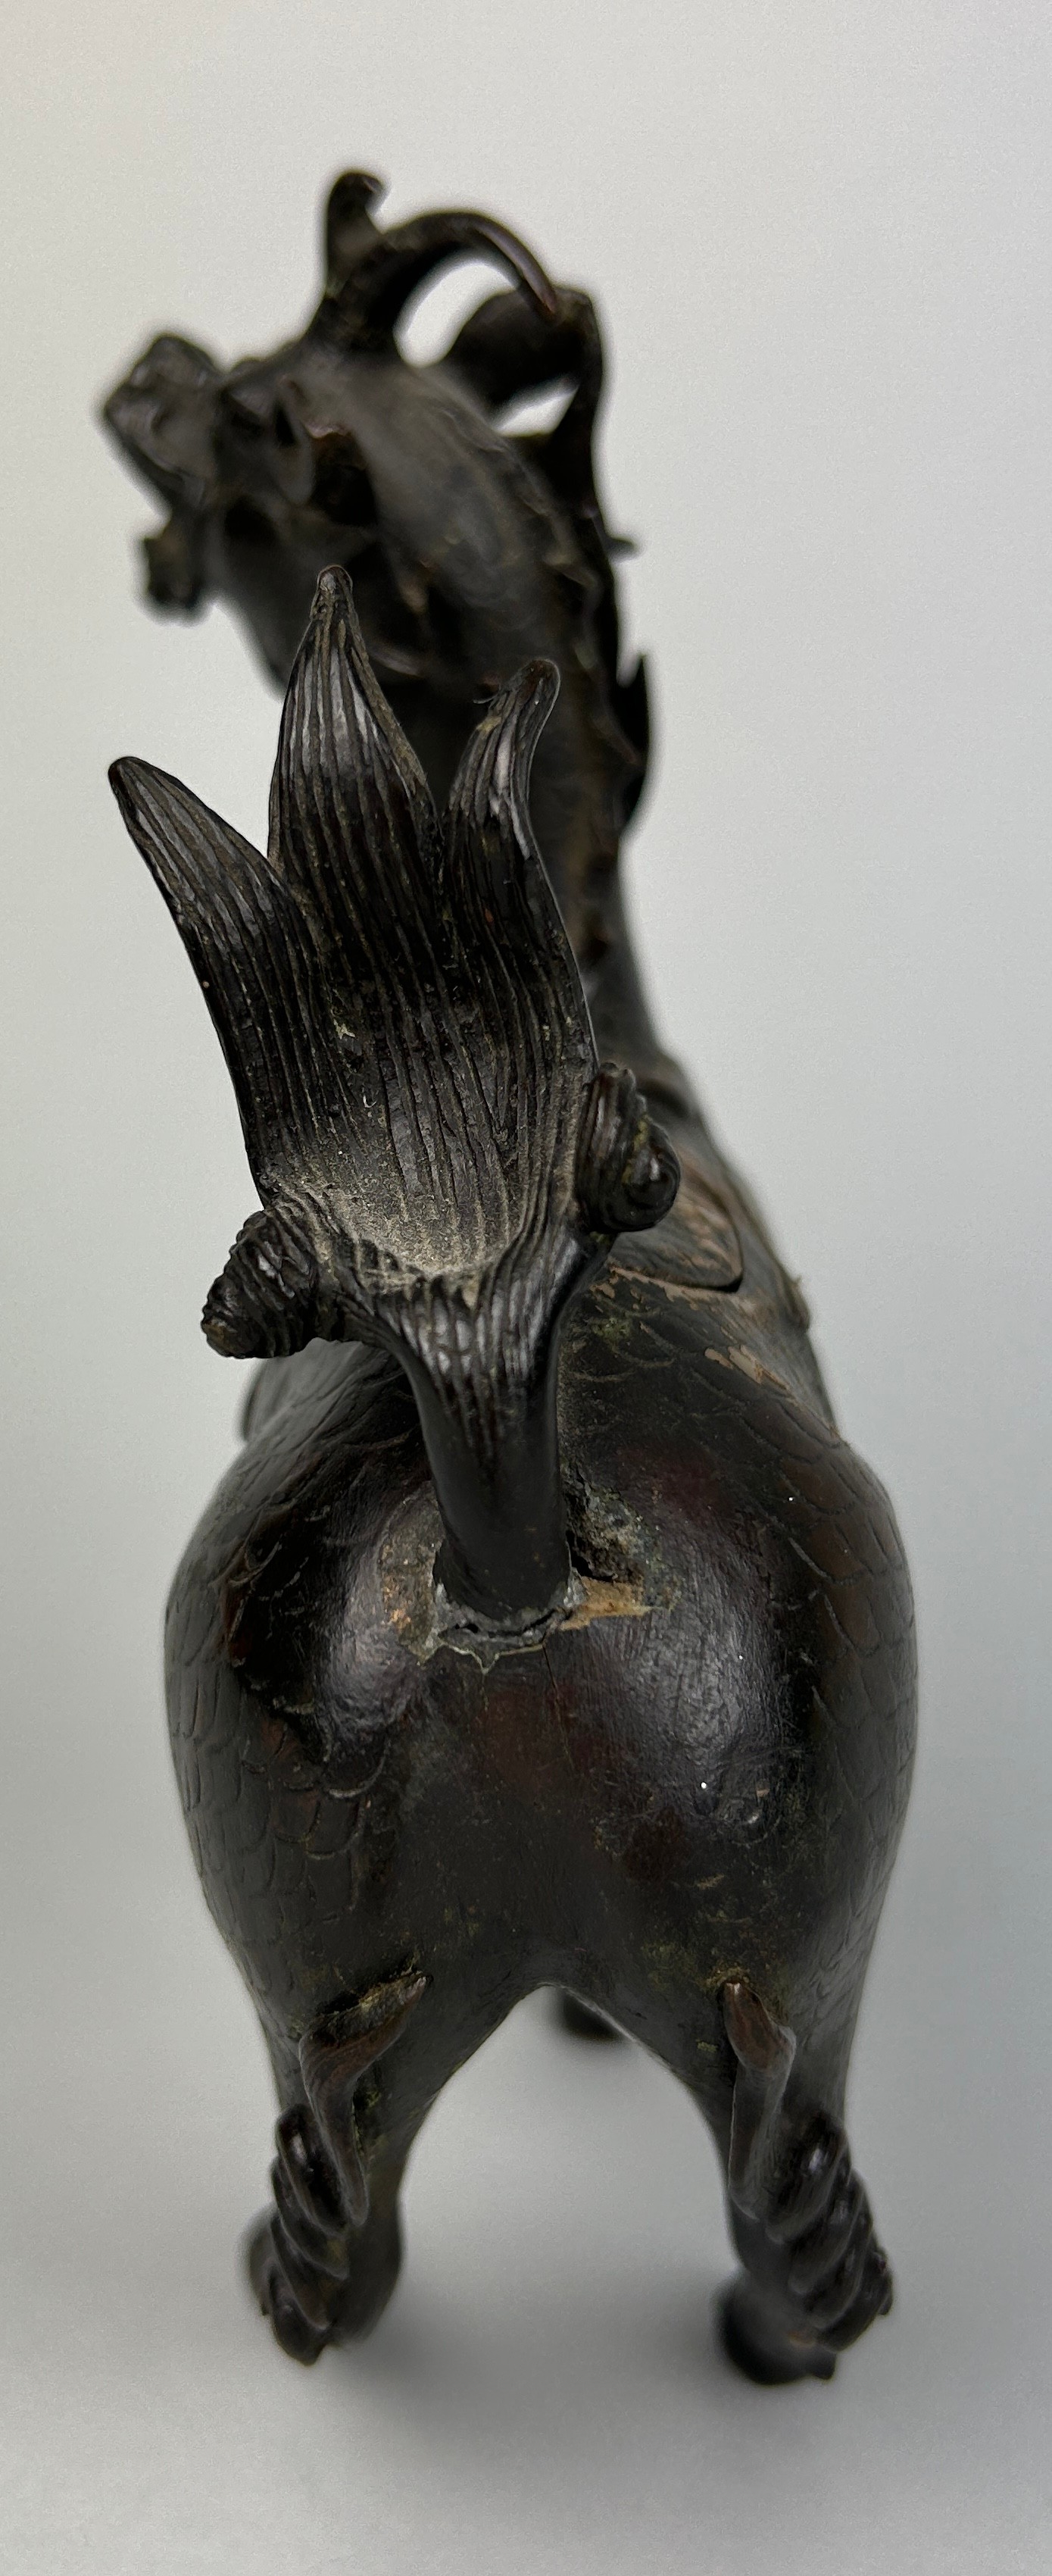 A CHINESE BRONZE FIGURE OF A MYTHICAL ANIMAL, POSSIBLY 18TH CENTURY, 18cm x 14cm With opening - Image 5 of 7